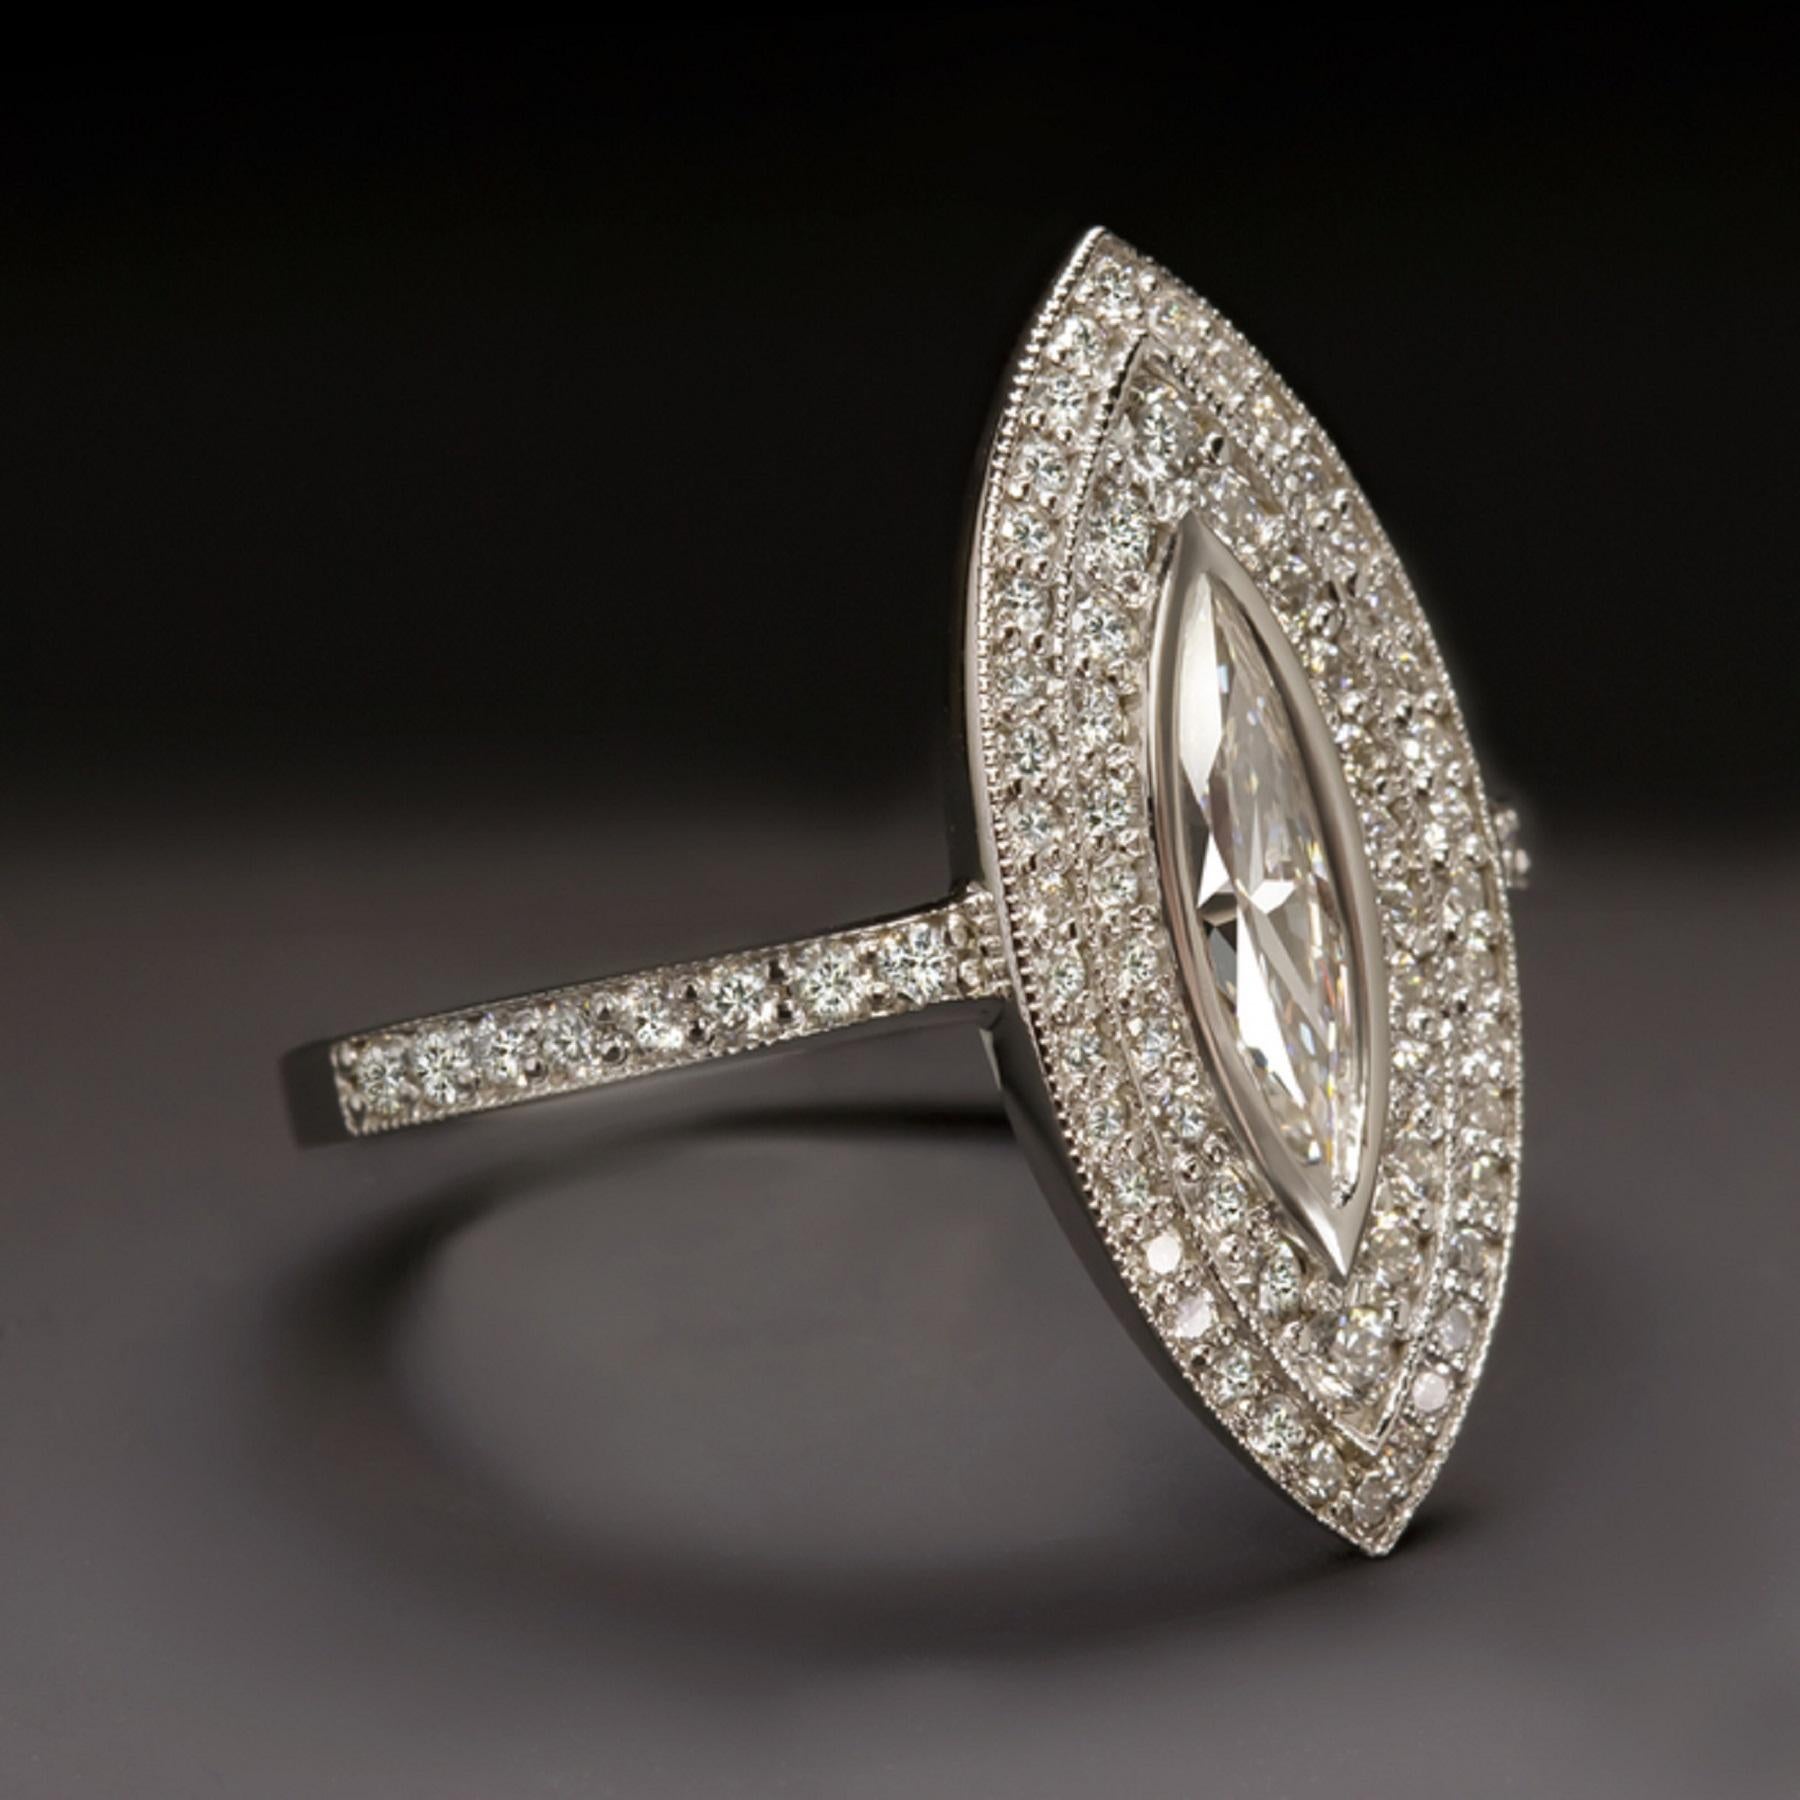 This breathtaking diamond encrusted cocktail ring is elegantly designed with an artful and elegant style and a high quality vintage marquise cut diamond center. 

Measuring an eye catching 21.7mm across, this glamorous vintage style ring will